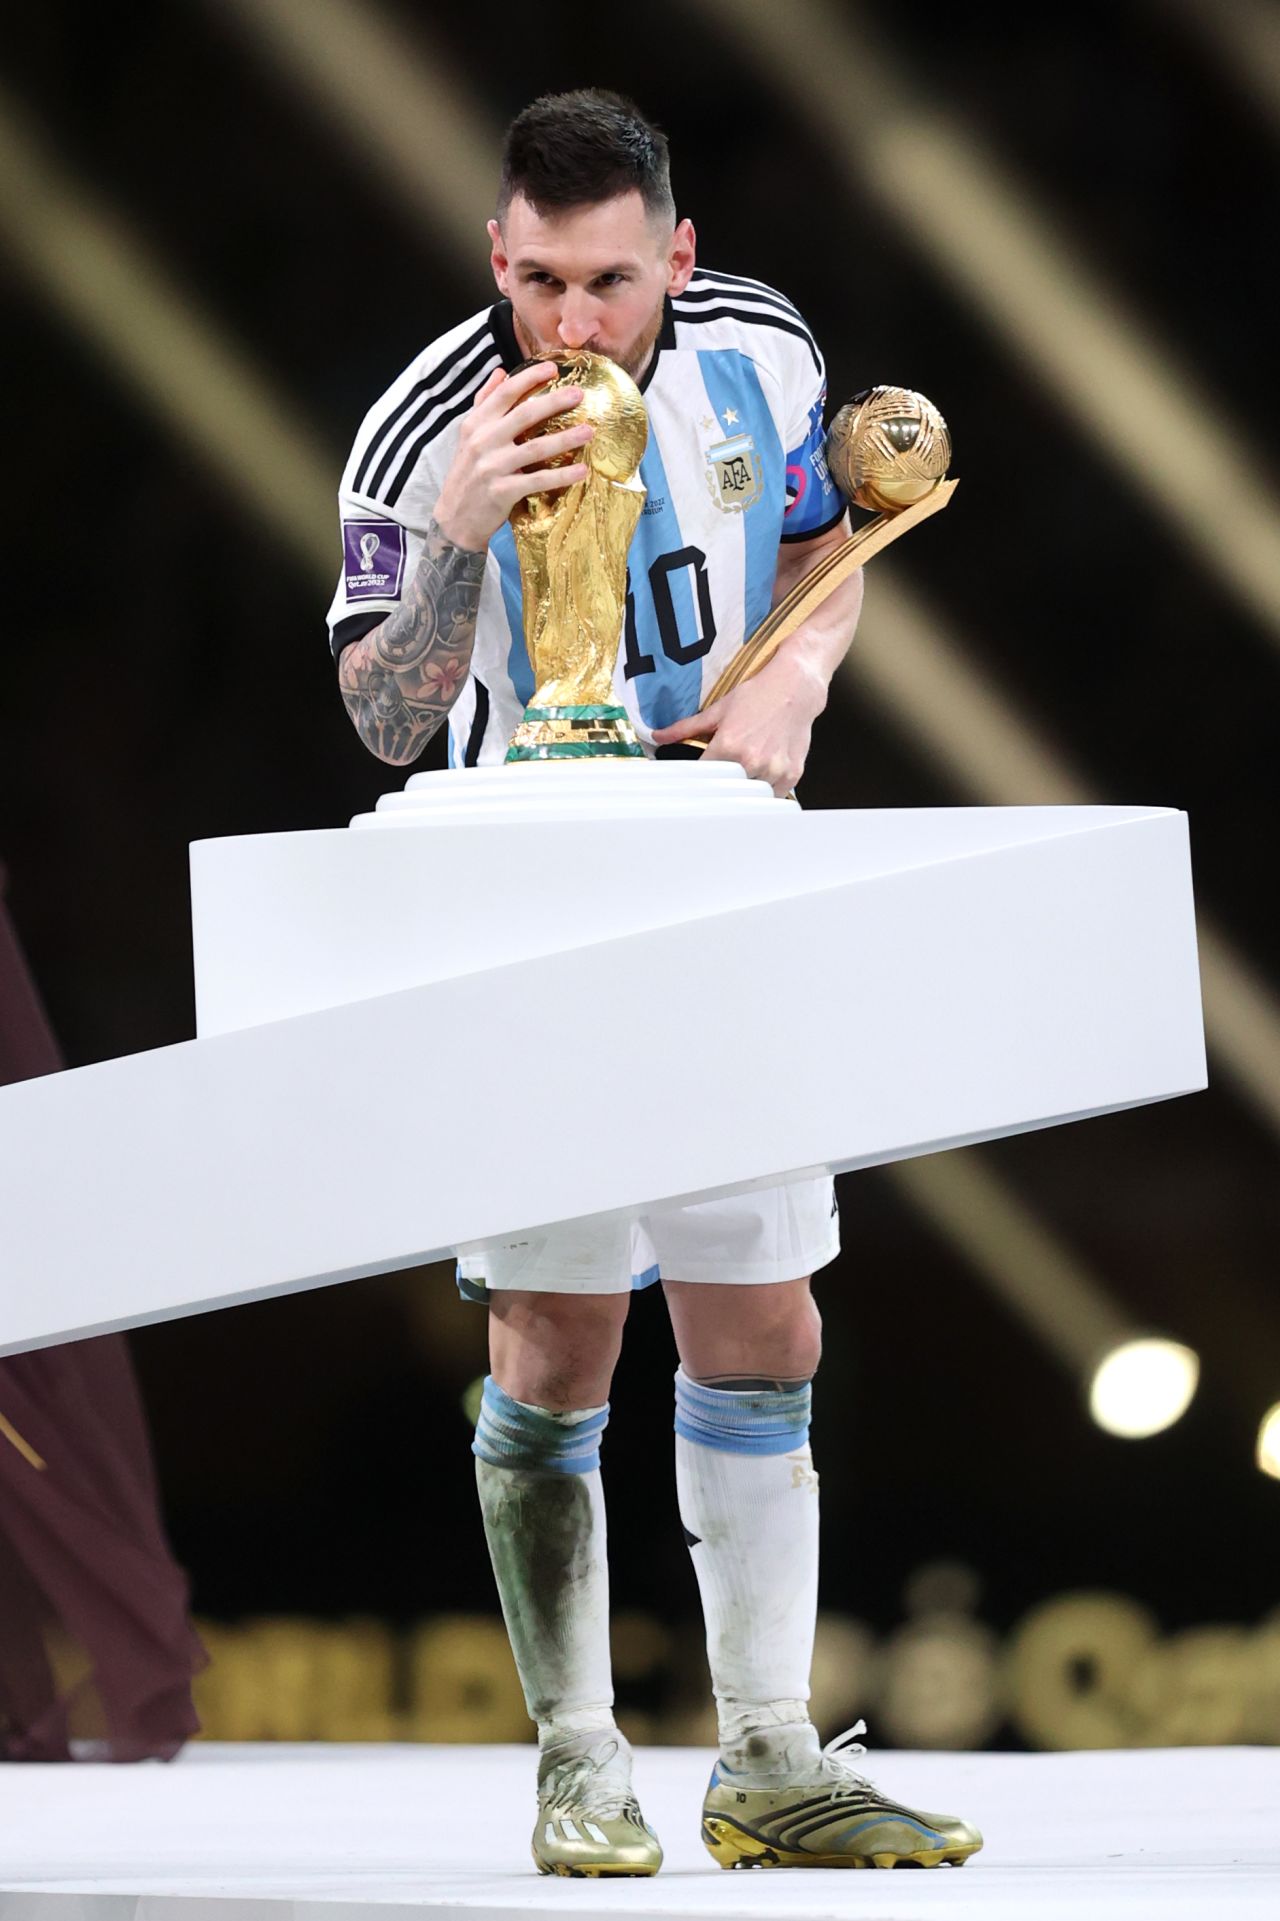 Messi kisses the World Cup trophy after Argentina defeated France in the 2022 final. Messi is holding the Golden Ball trophy, which is awarded to the tournament's best player.